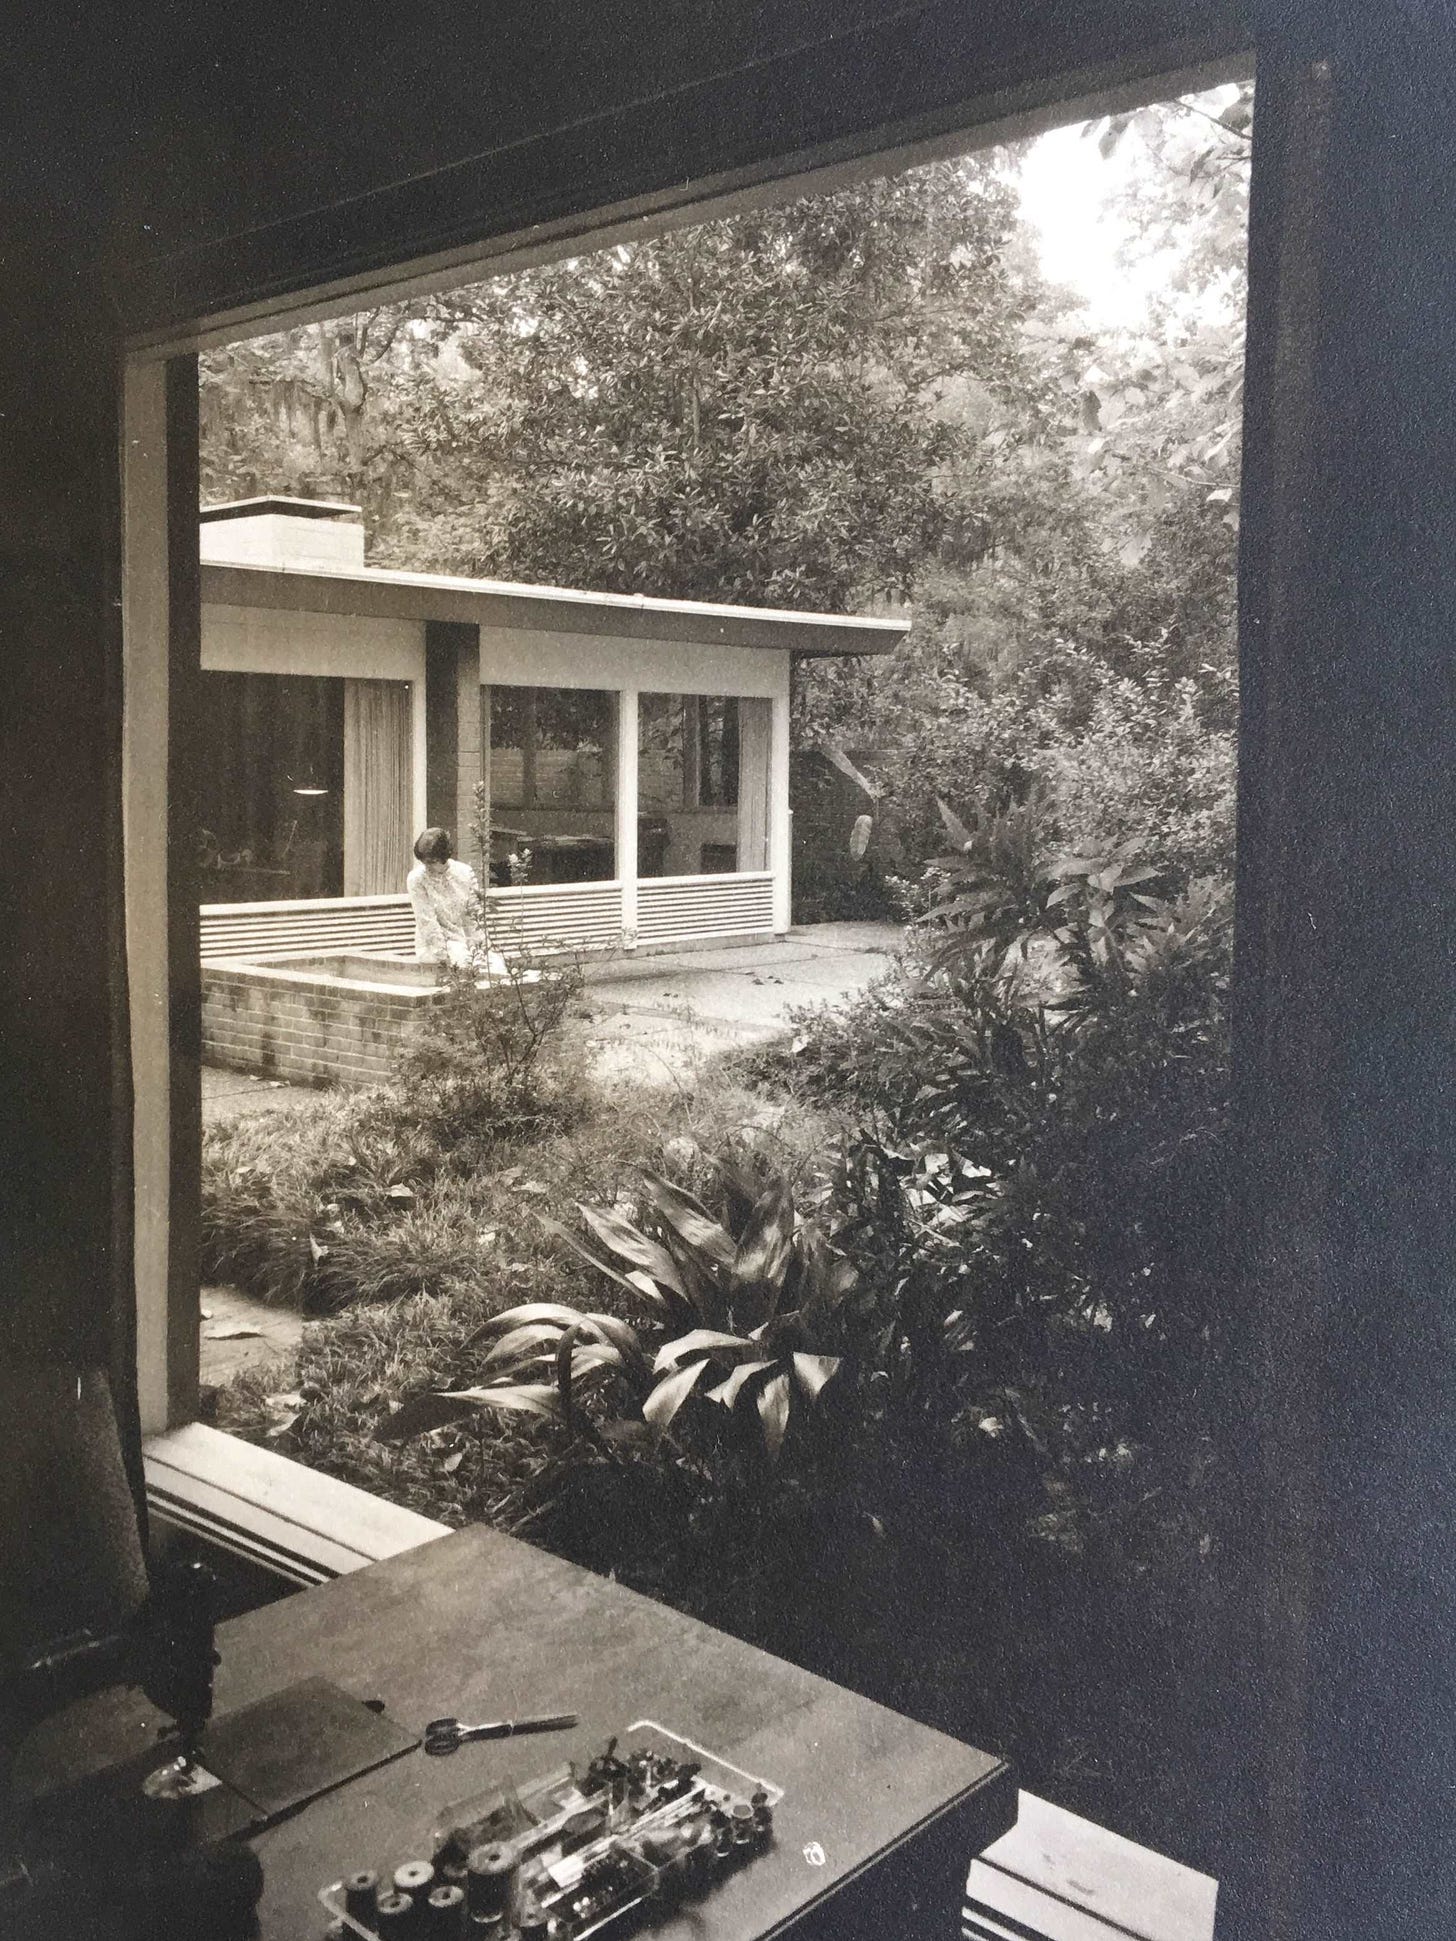 Facing back patio of the Kenneth C. and Carolyn B. Landry House, circa mid-1960s